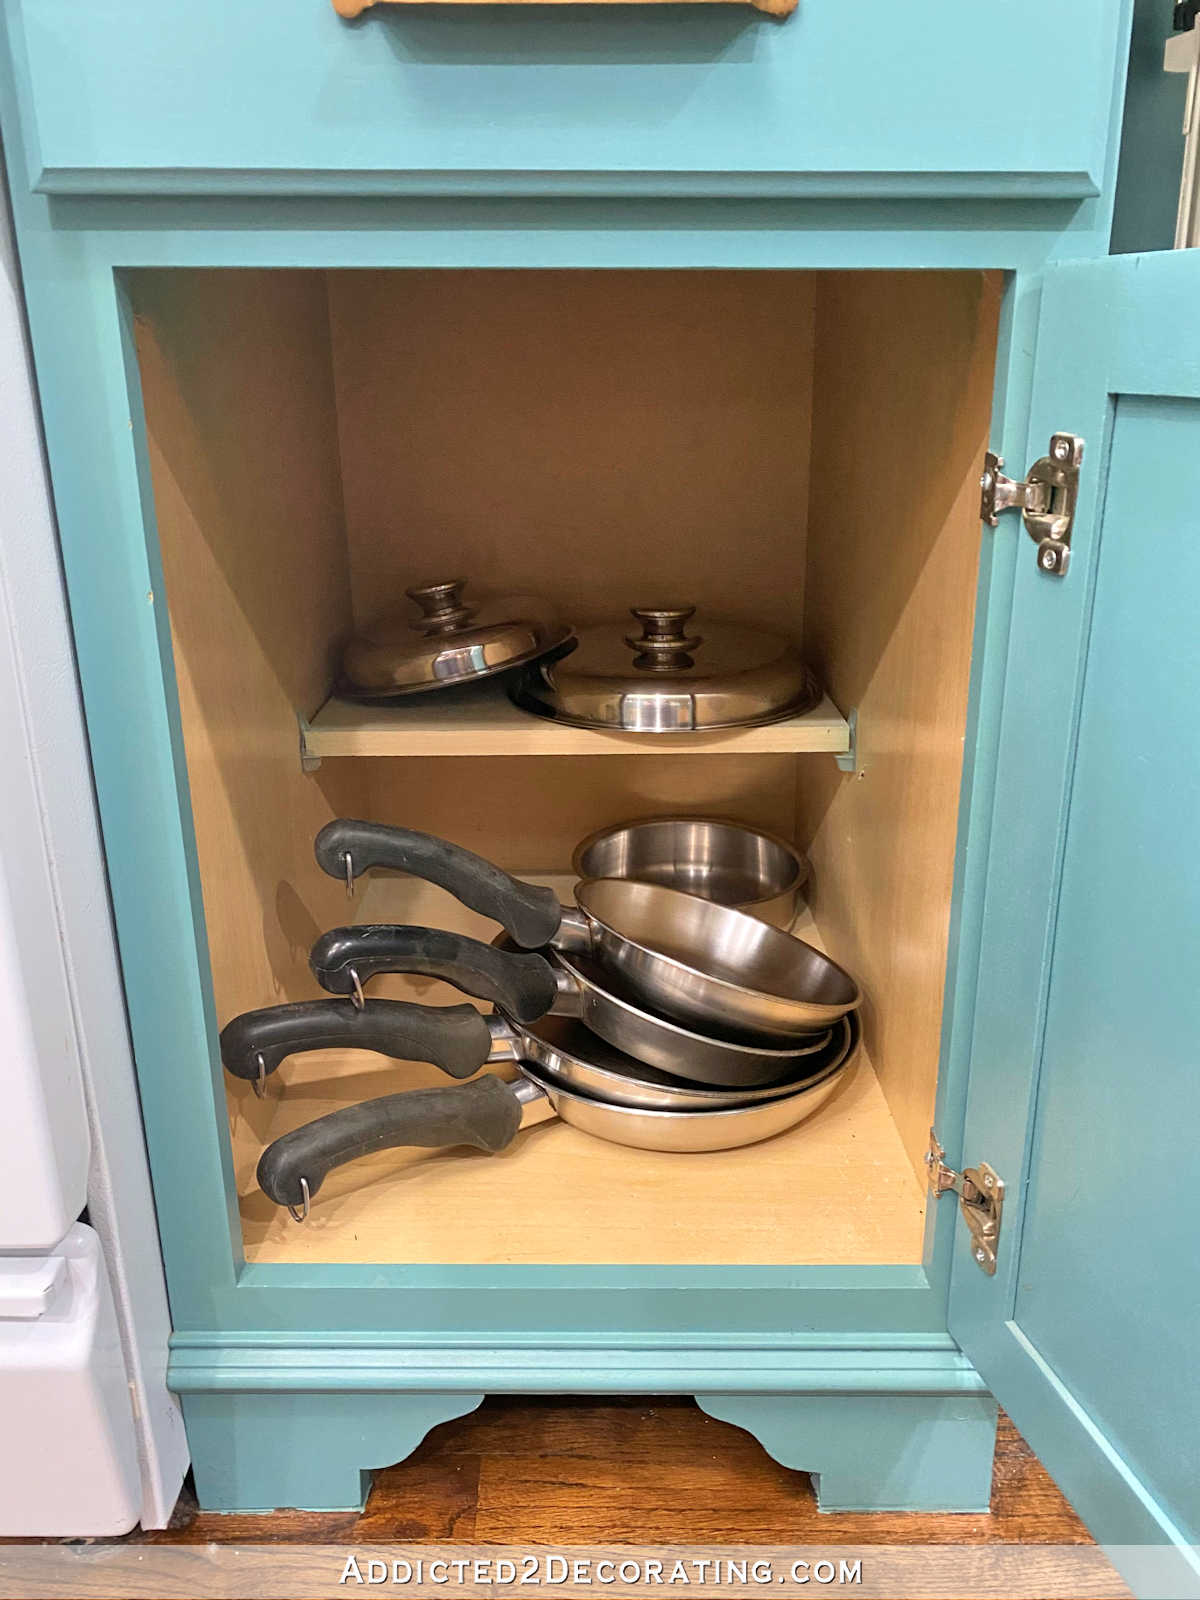 https://www.addicted2decorating.com/wp-content/uploads/2022/03/diy-skillet-and-lid-storage-1-before-resized.jpg